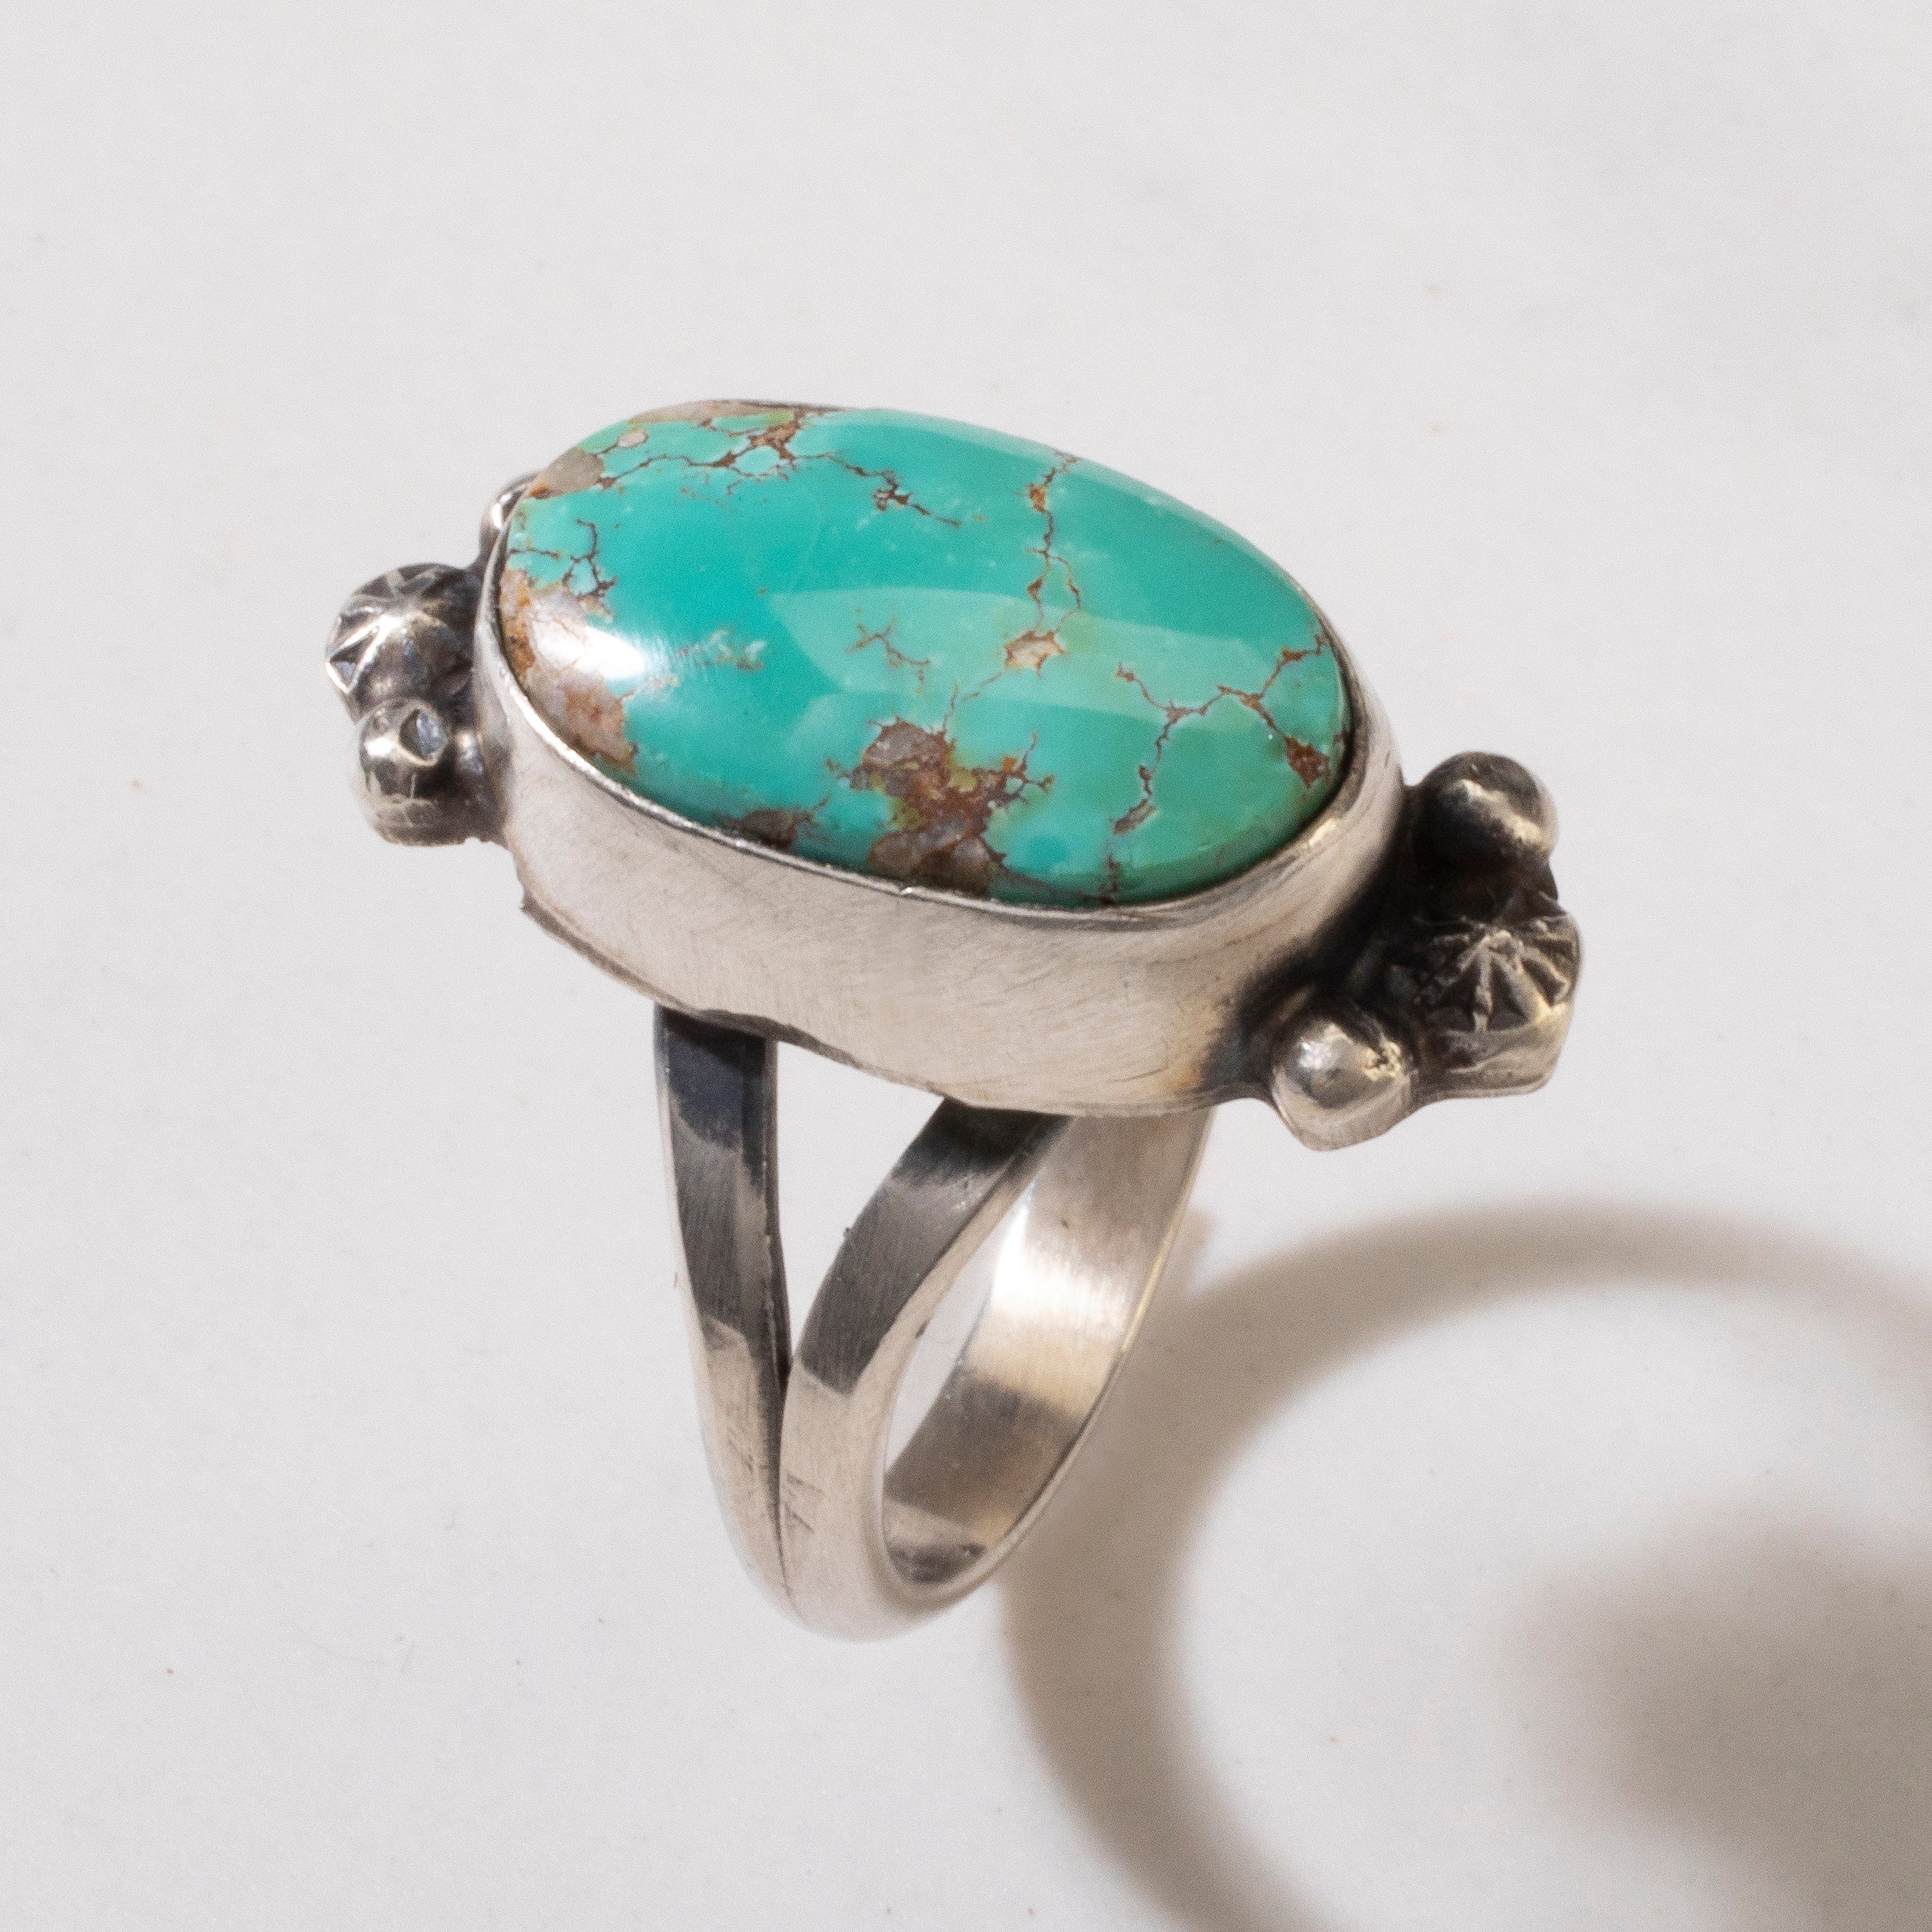 Kalifano Native American Jewelry 7.5 Scott Skeets Royston Turquoise Navajo USA Native American Made 925 Sterling Silver Ring NAR600.069.75